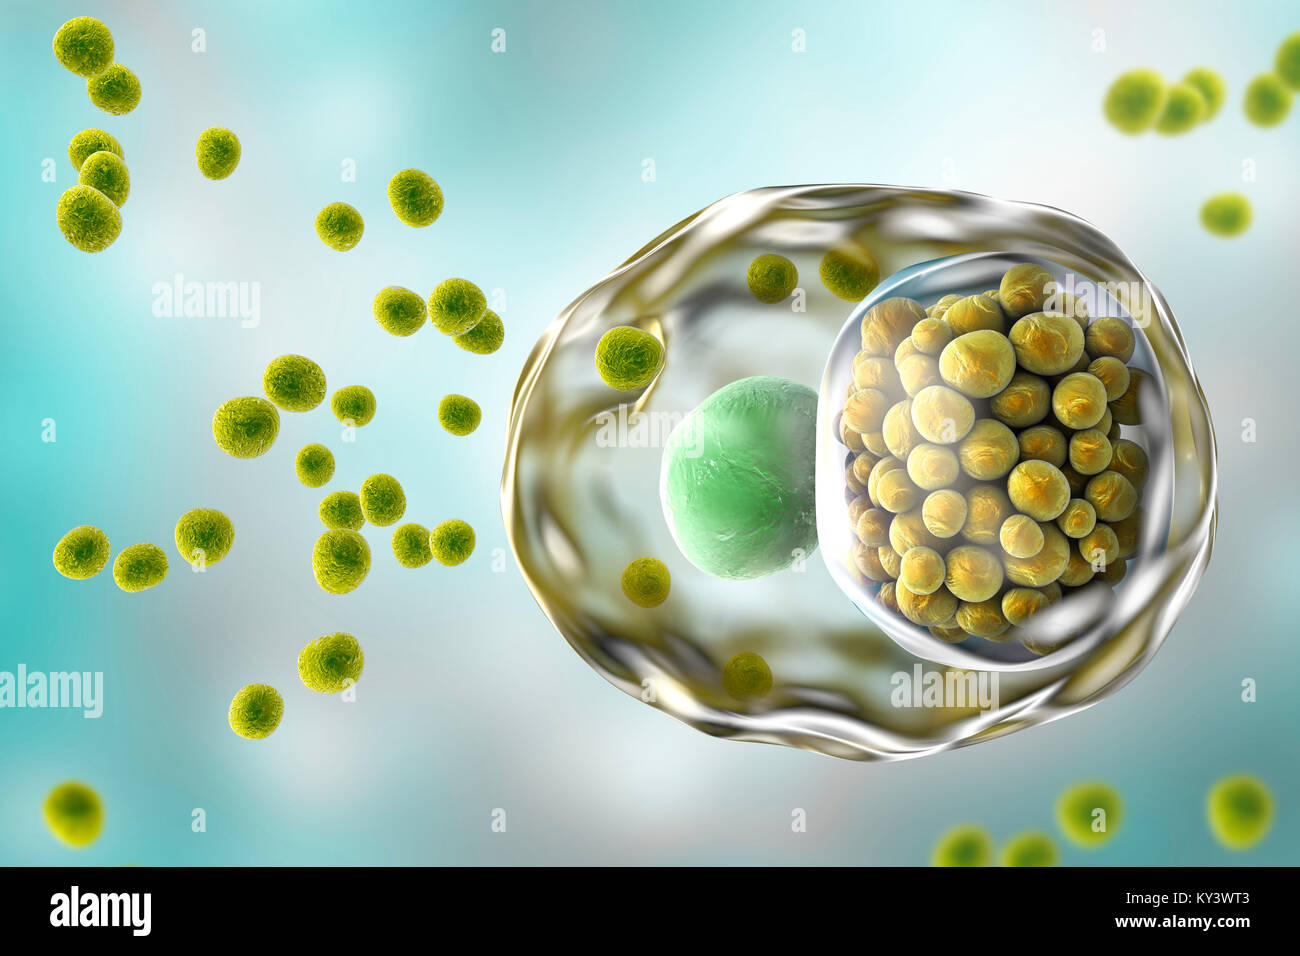 Chlamydia infection. Computer illustration of a cell infected with Chlamydia trachomatis bacteria. Elementary bodies (EBs, small dark green spheres), the non-replicating infectious form of the bacteria are seen outside the host cell. EBs infect the cell and are transformed into reticulate bodies (RB), which are replicating form. RBs are seen as a group of small light green spheres near the nucleus (dark green) of the cell. Chlamydia is a sexually transmitted infection that can go undetected causing infertility. It also causes the eye disease trachoma, which can lead to blindness. Stock Photo